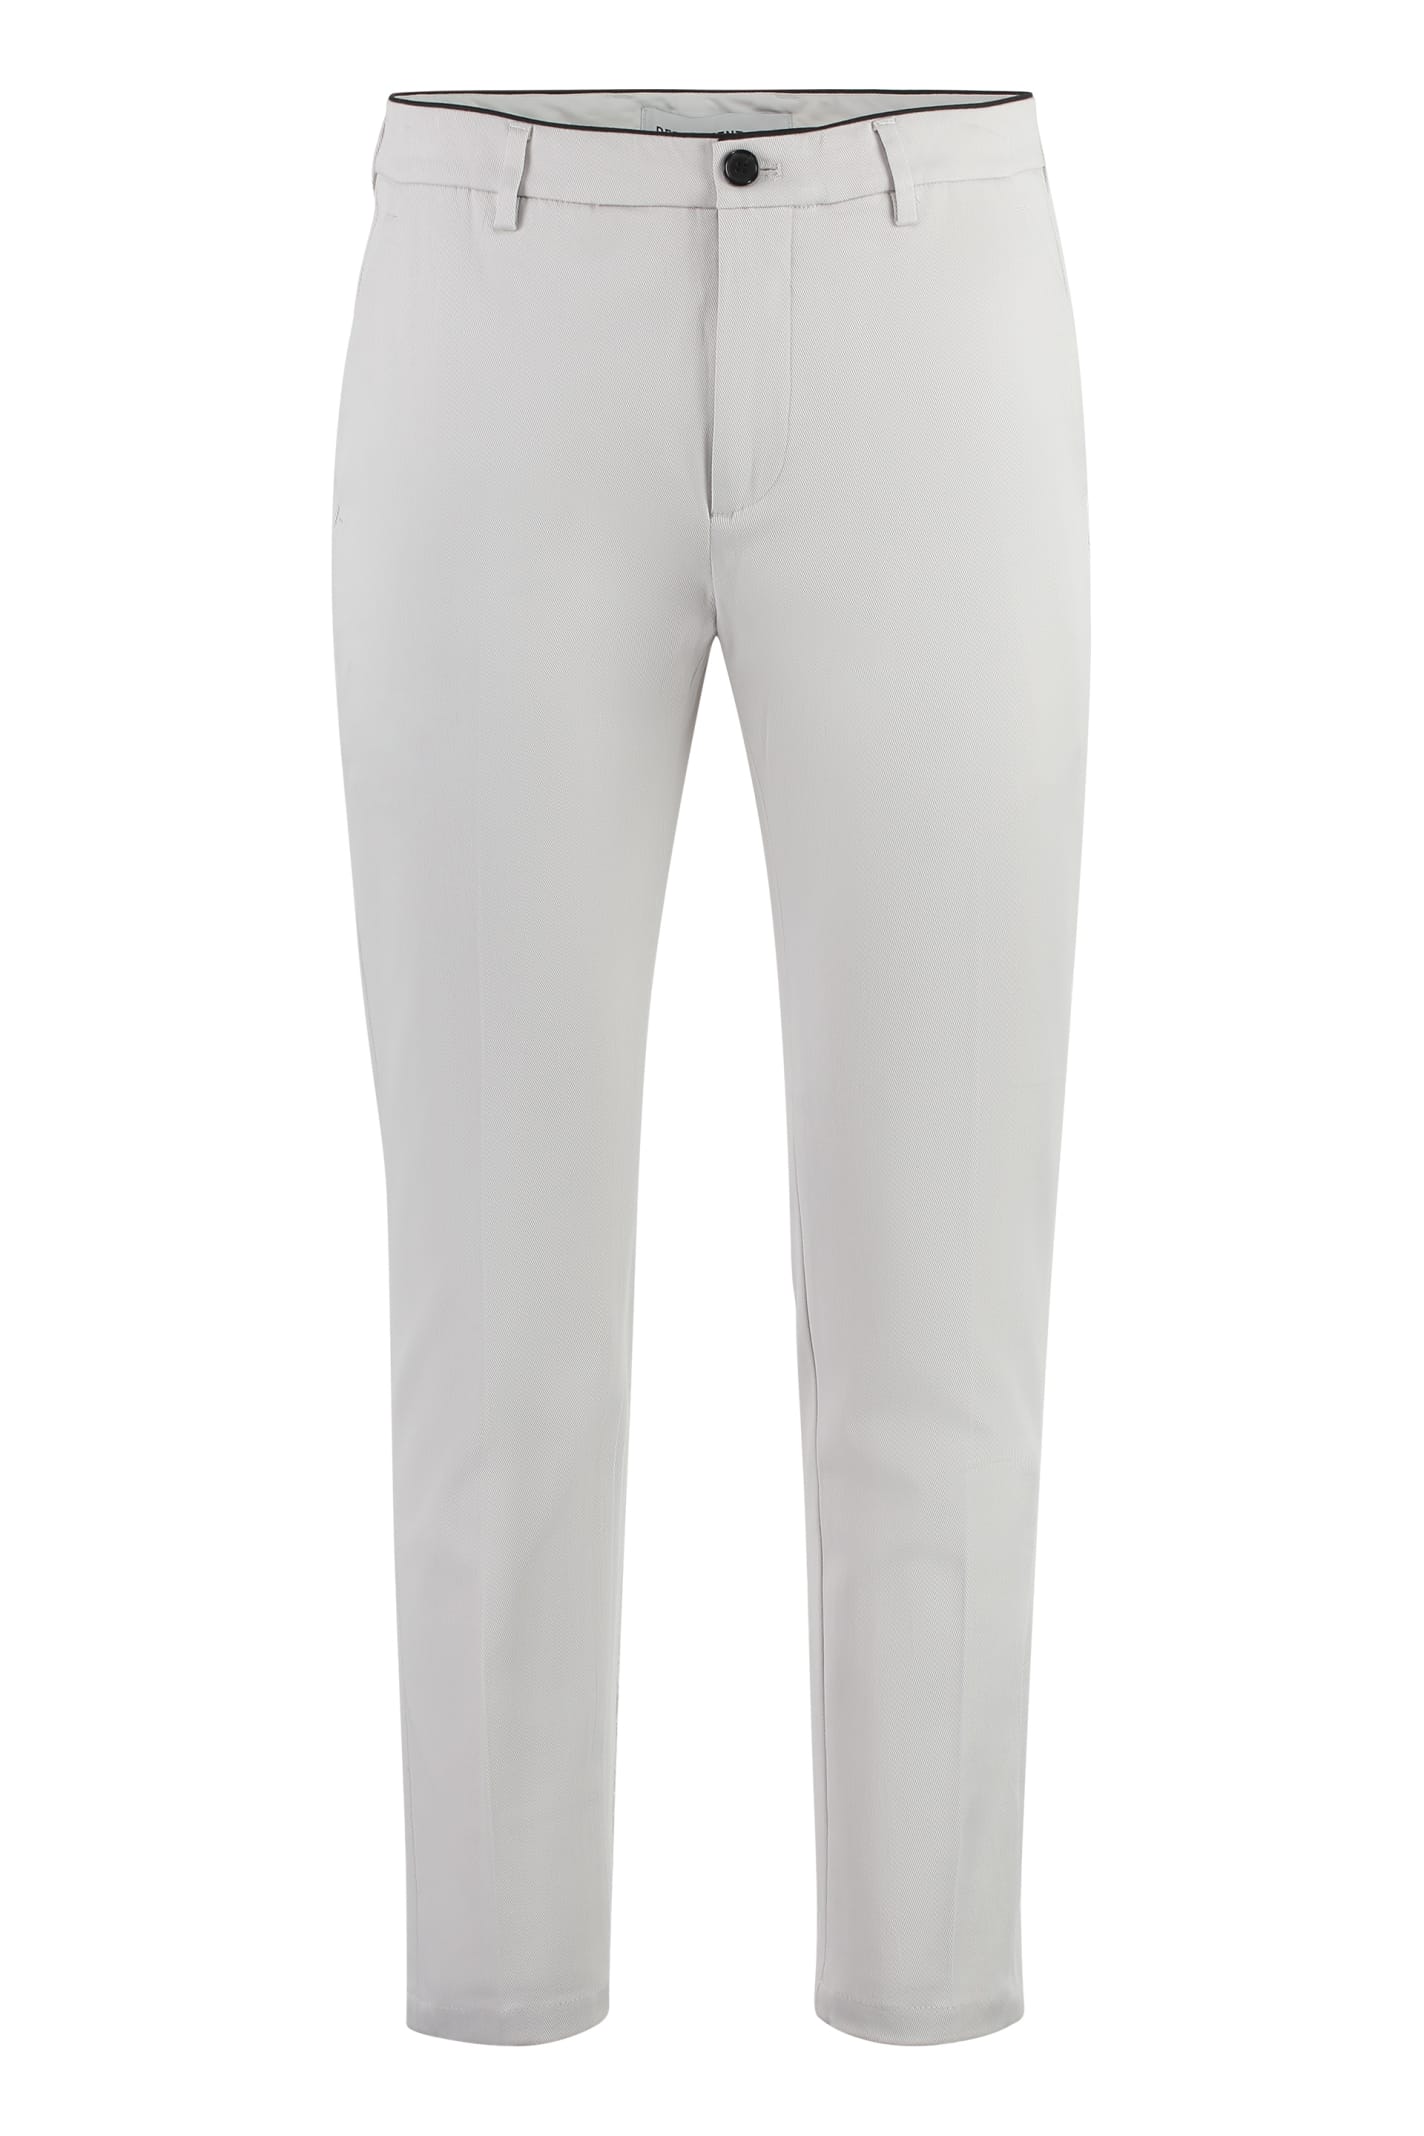 Department Five Prince Chino Pants In Light Gray